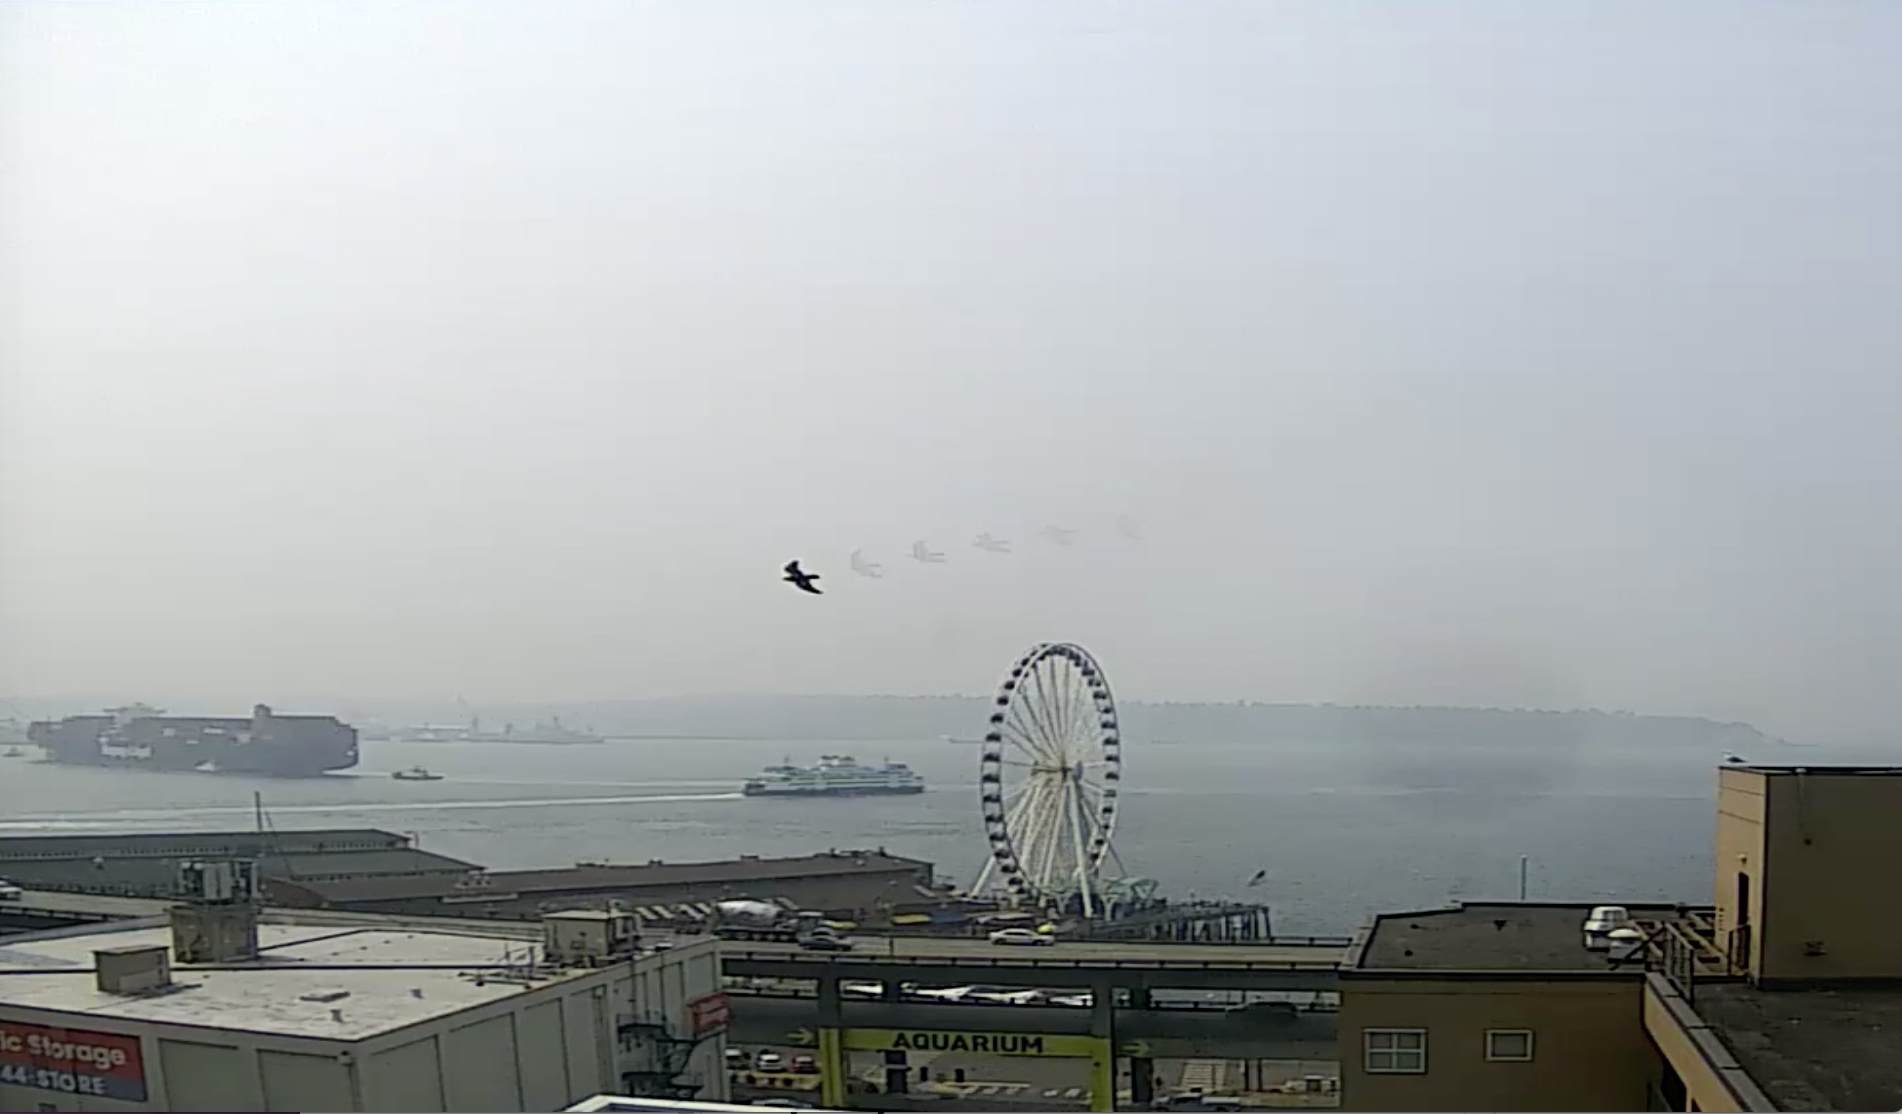 Seattle Waterfront Webcam SSW Whizzing Bird and Tanker 08 14 2018